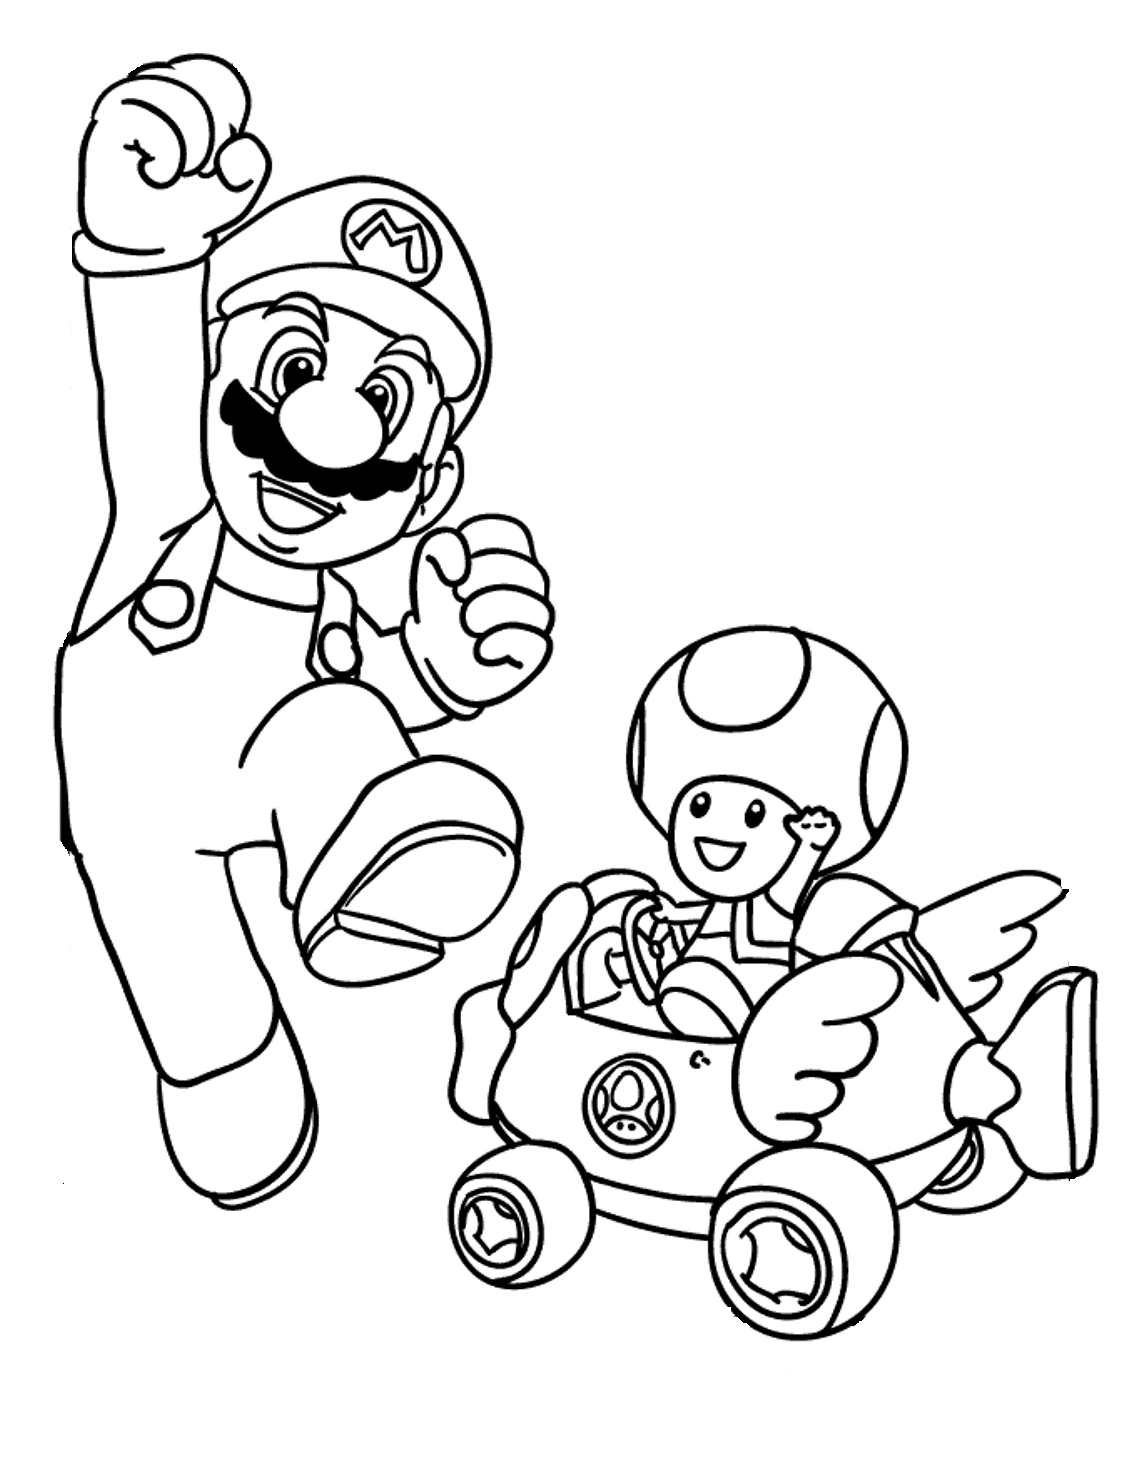 super mario bros pictures to print and colour mario bros coloring pages to download and print for free bros colour and pictures print super to mario 